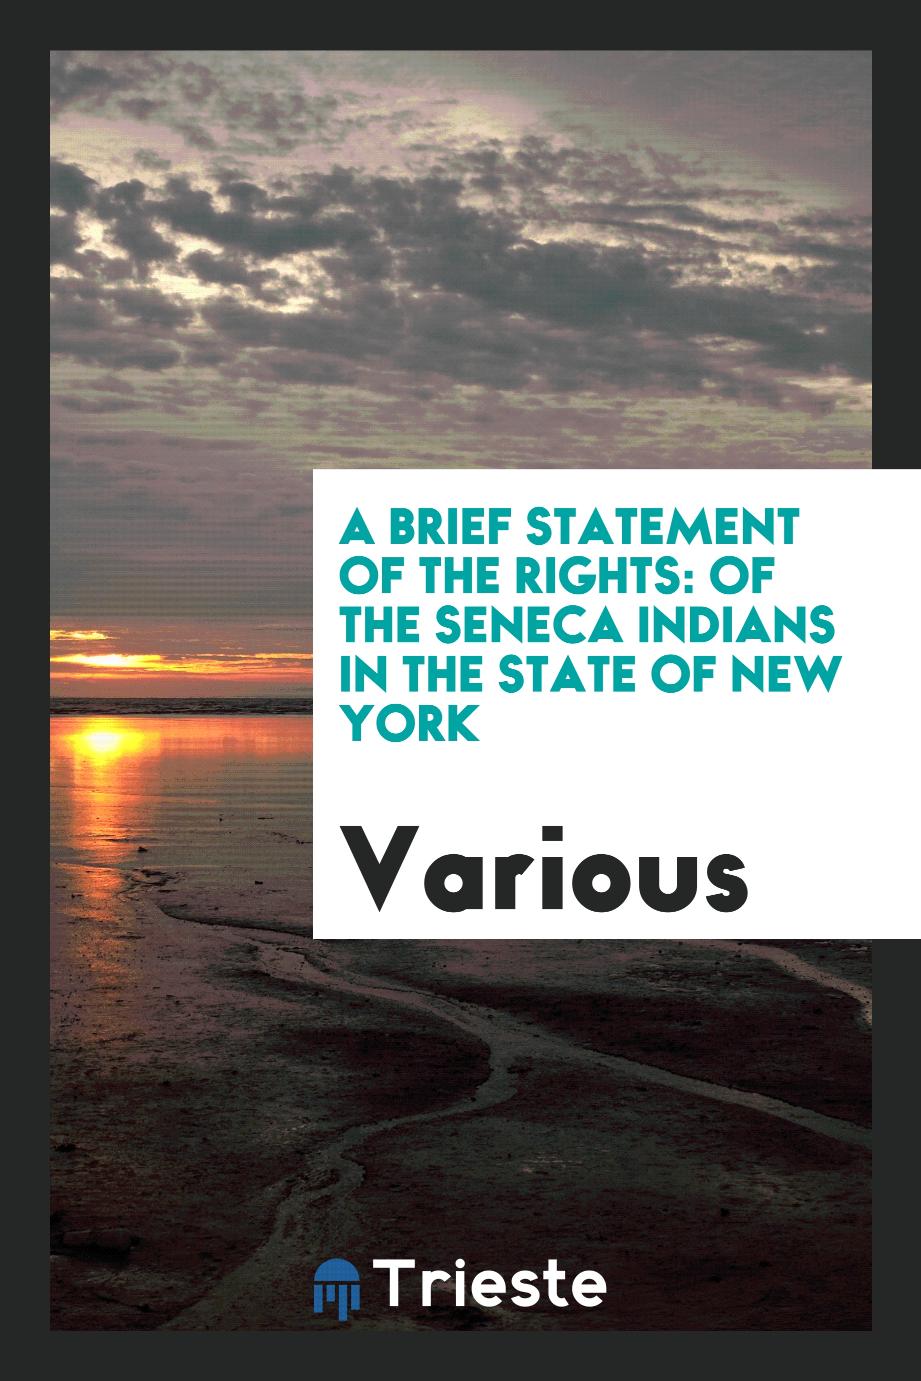 A Brief Statement of the Rights: Of the Seneca Indians in the State of New York